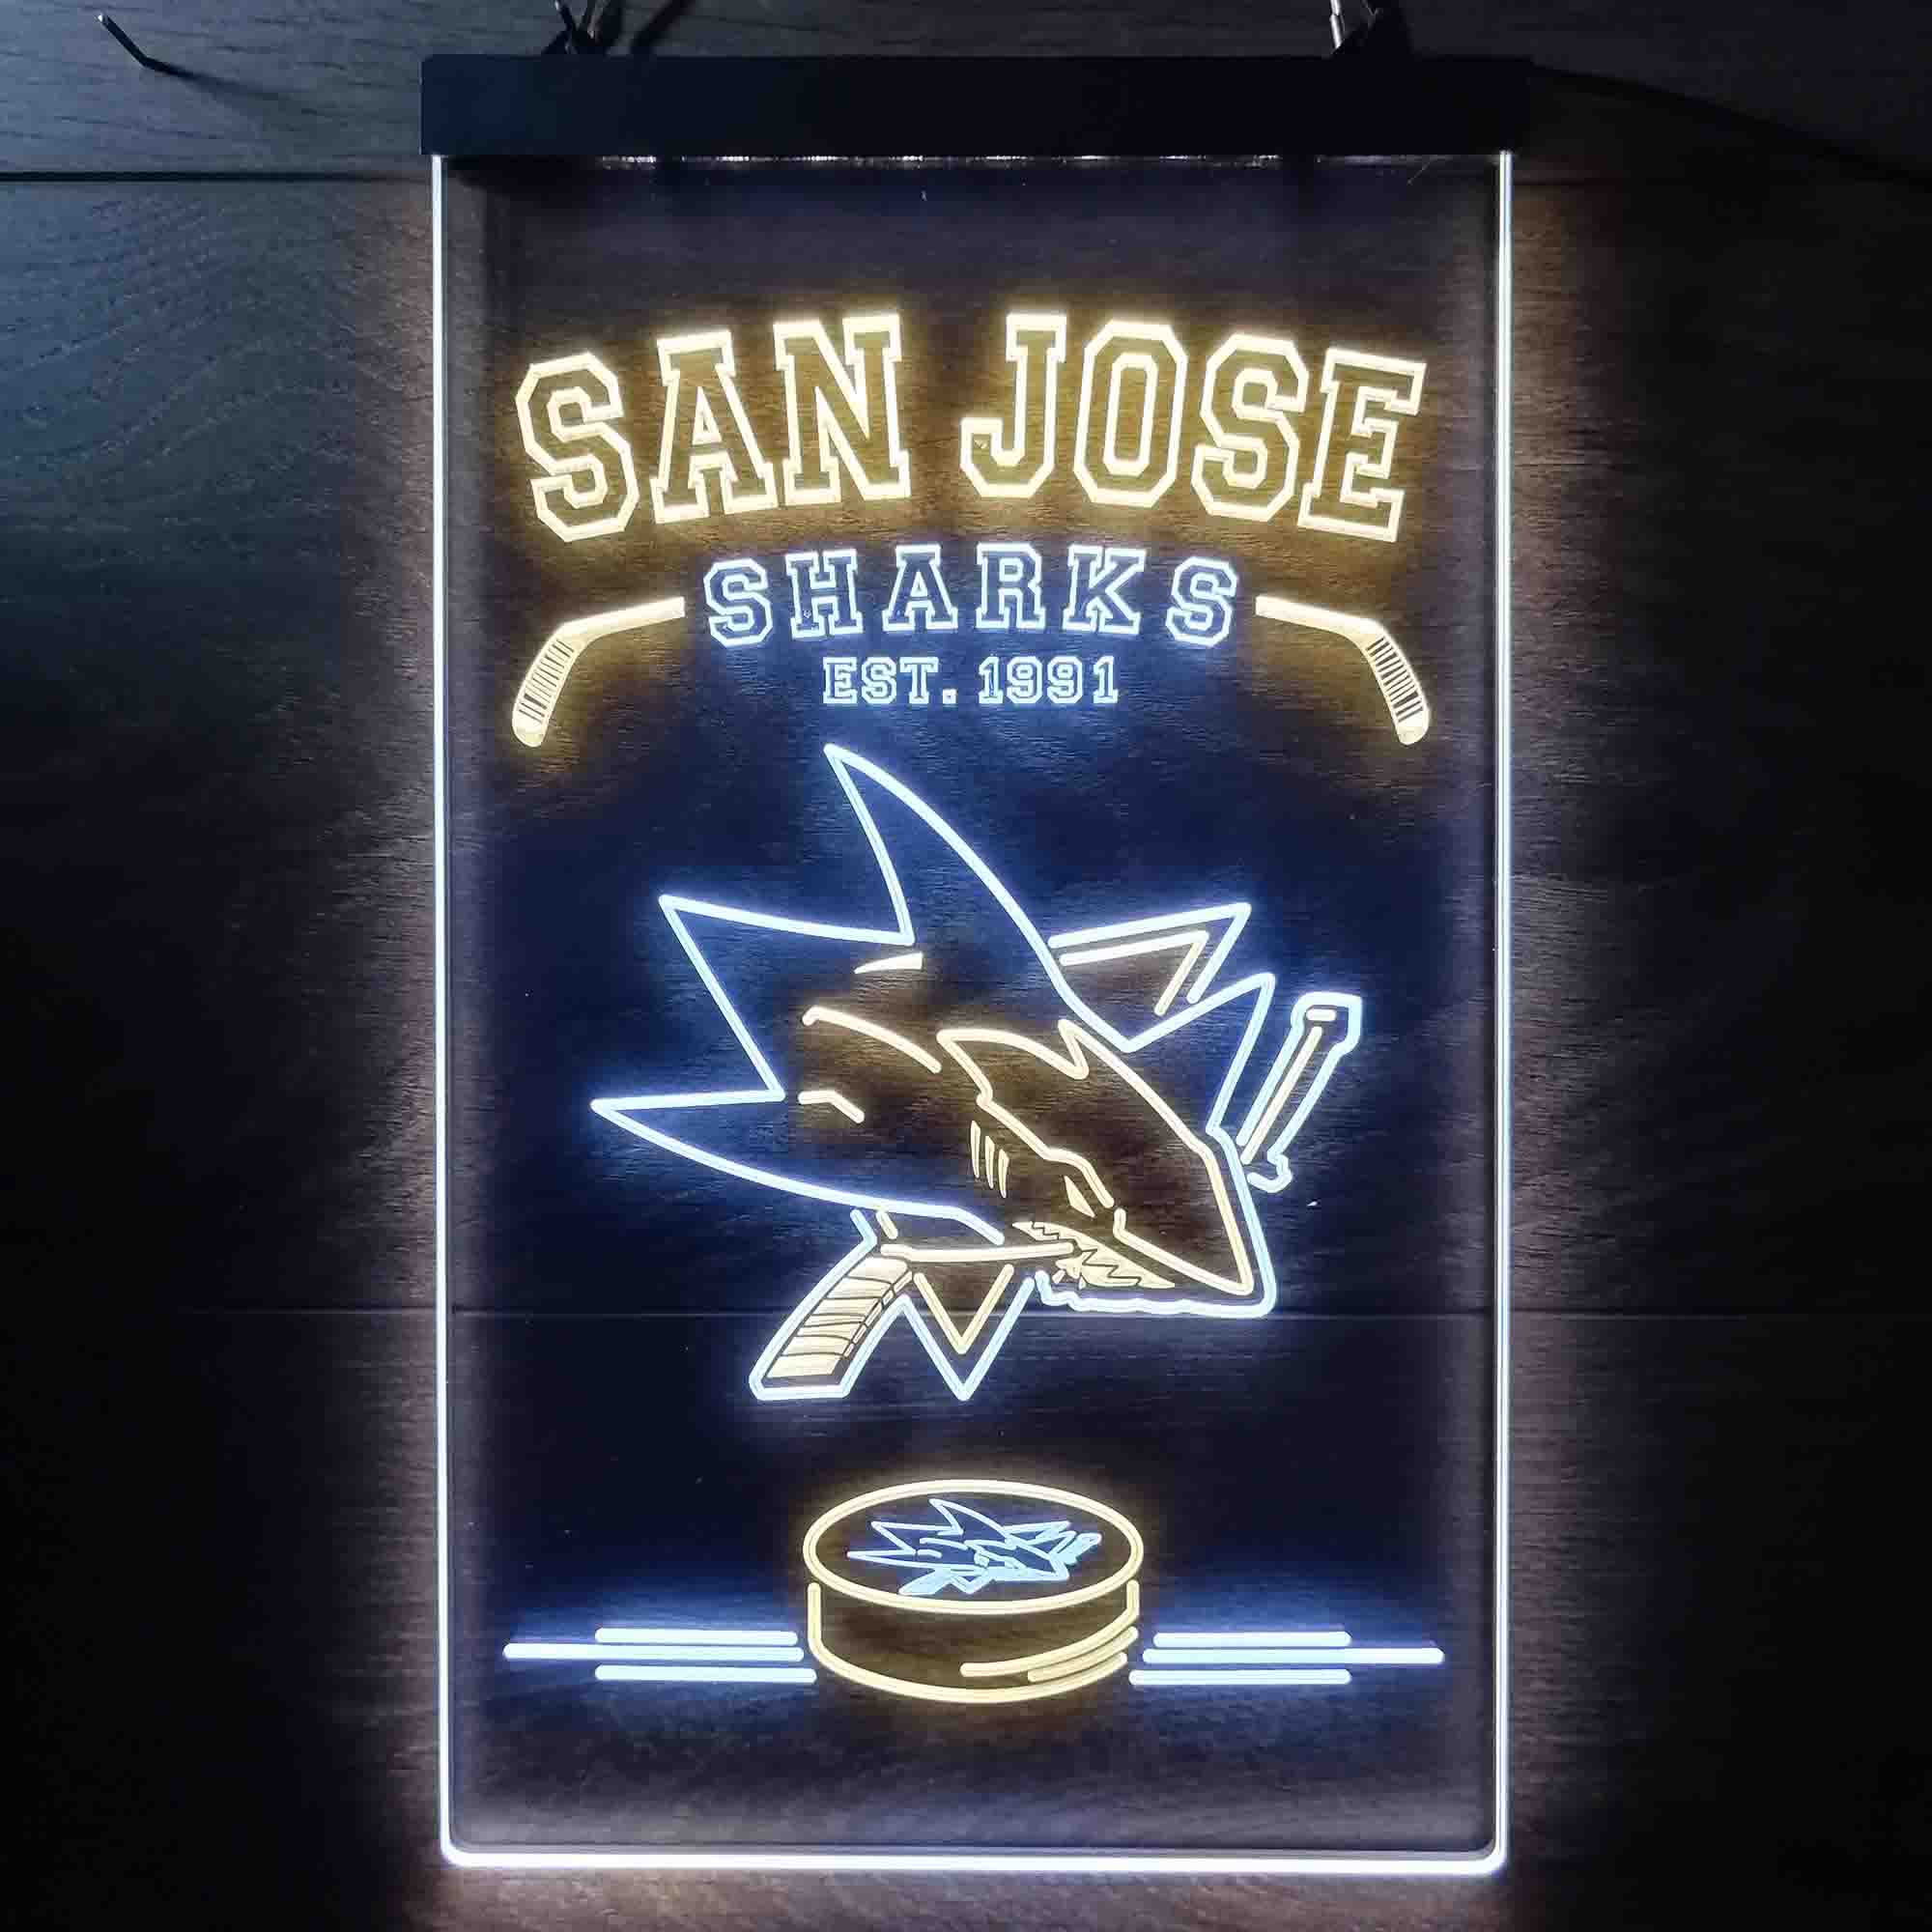 Relax, I don't even like the San Jose sharks.